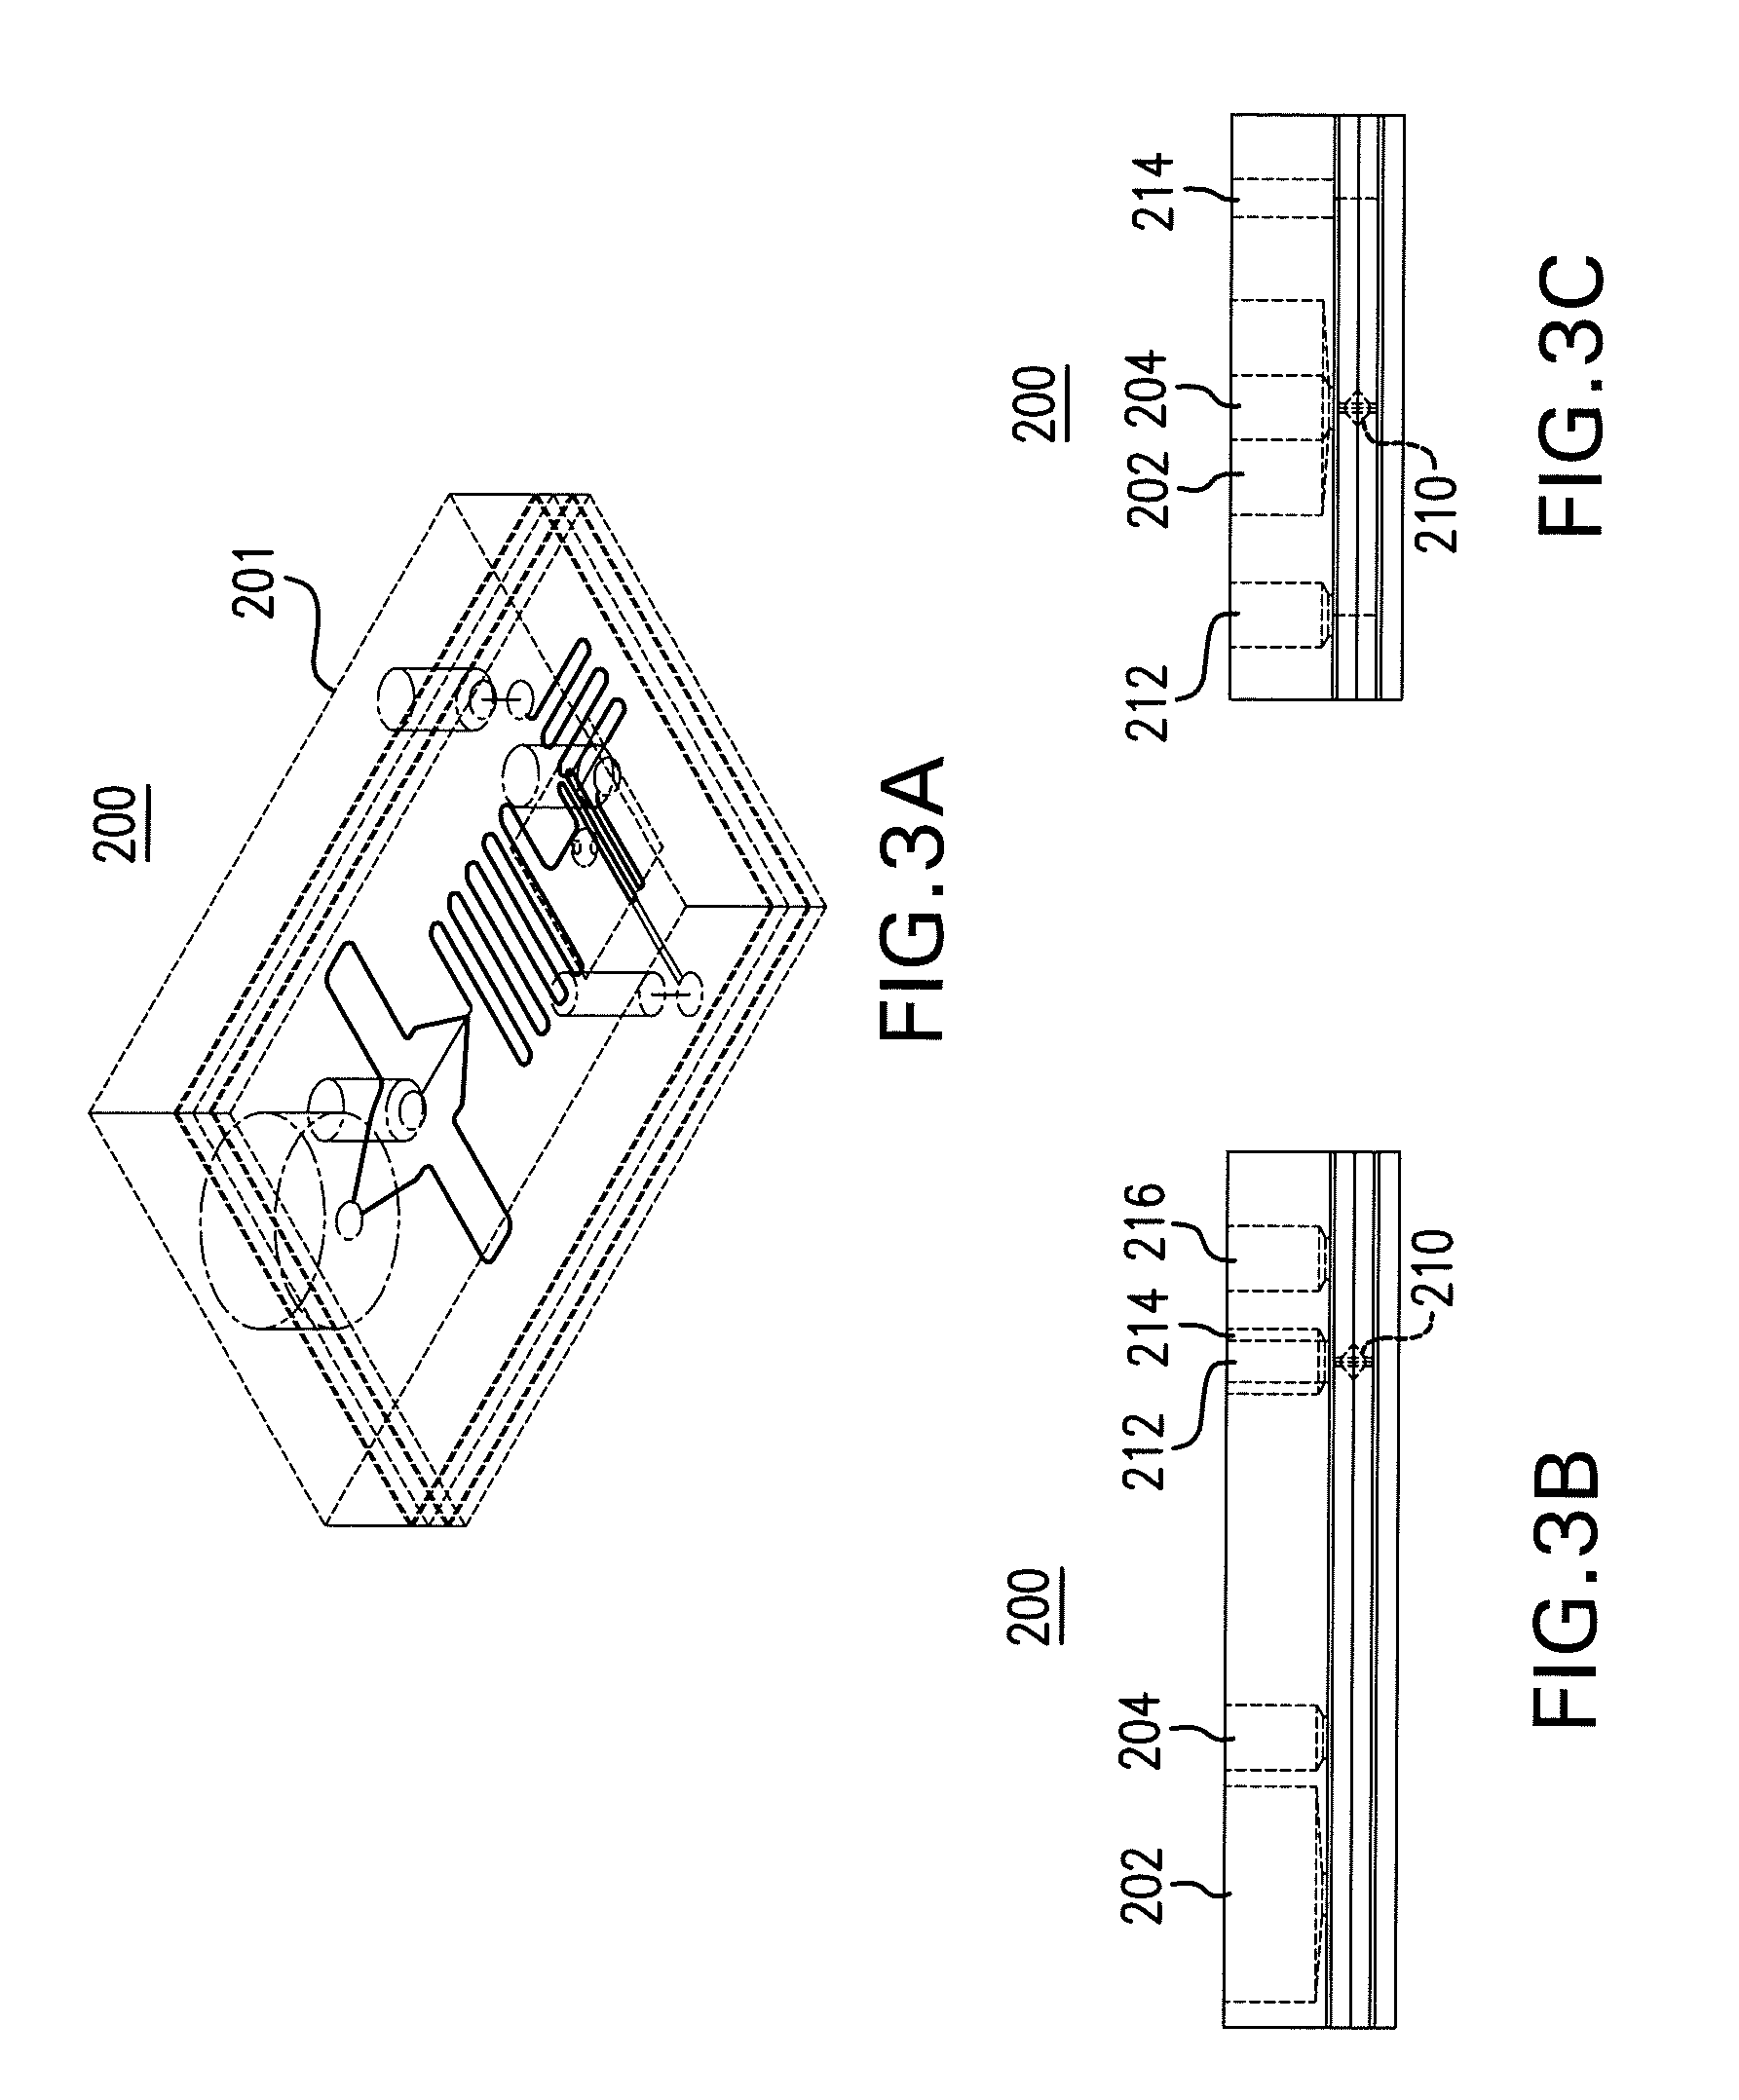 Methods and Systems for Microfluidic DNA Sample Preparation